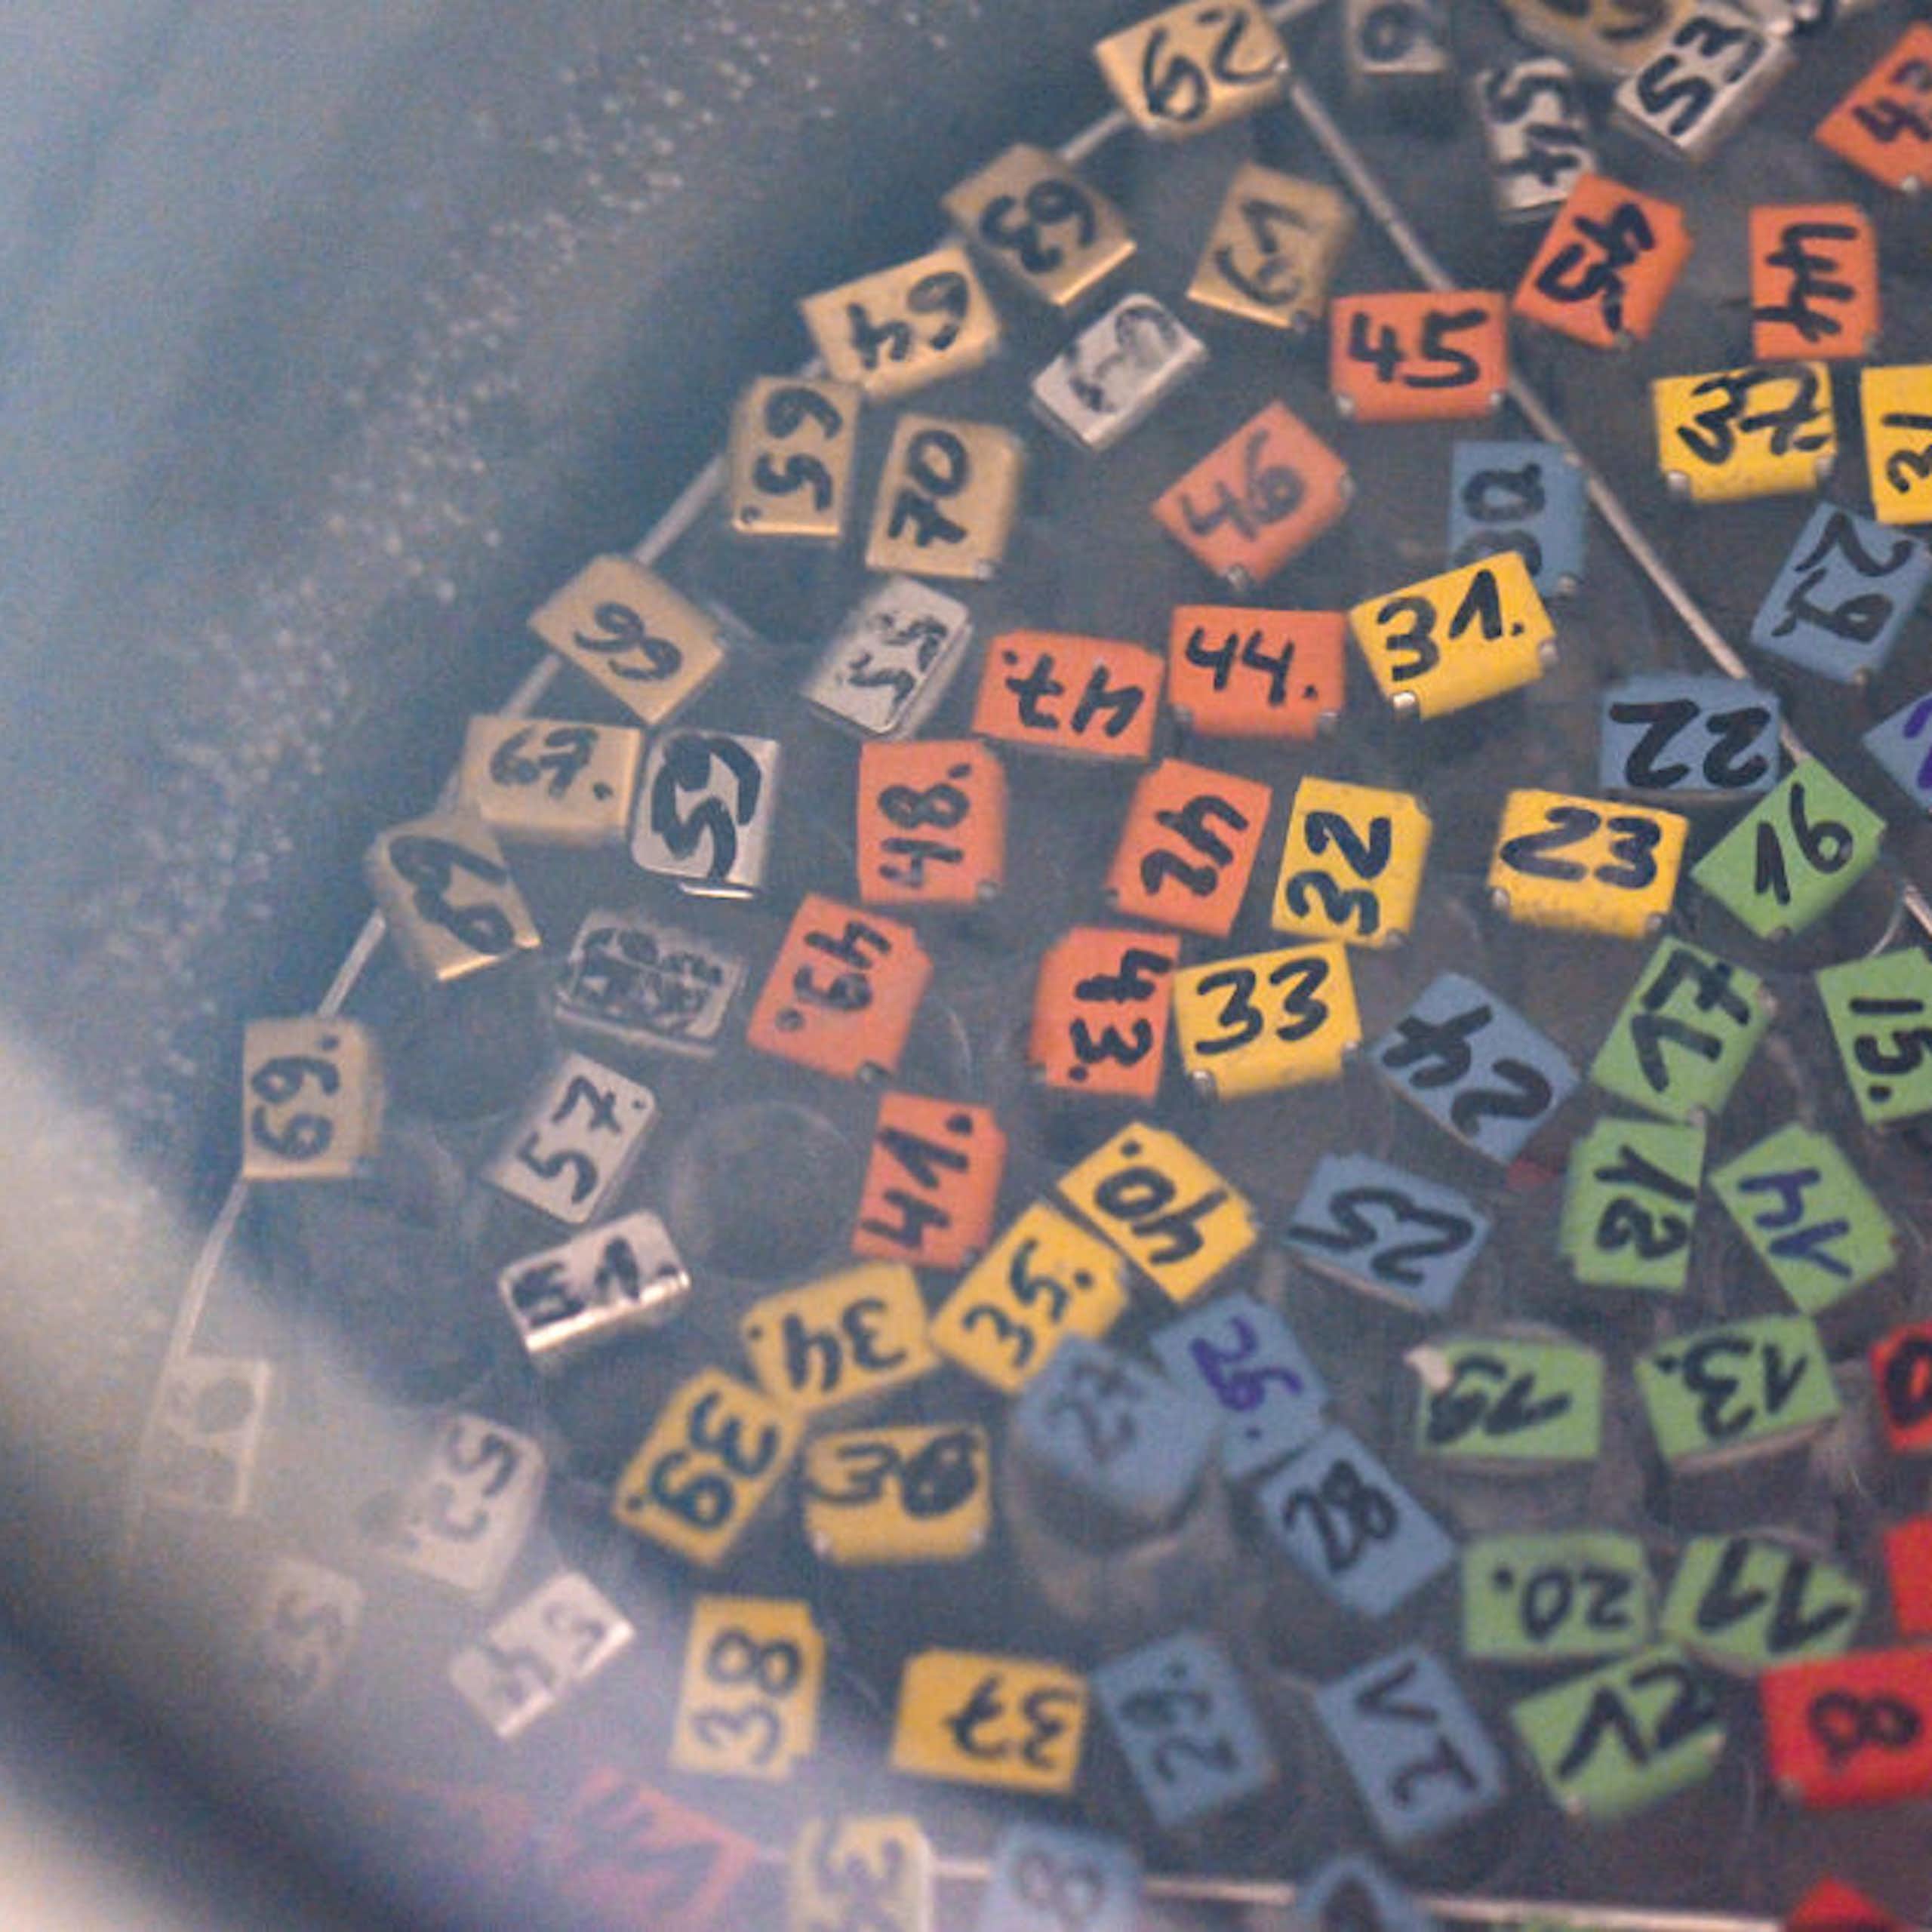 Overhead view of the colorful, labeled tops of numbered test tubes in a foggy silver tank